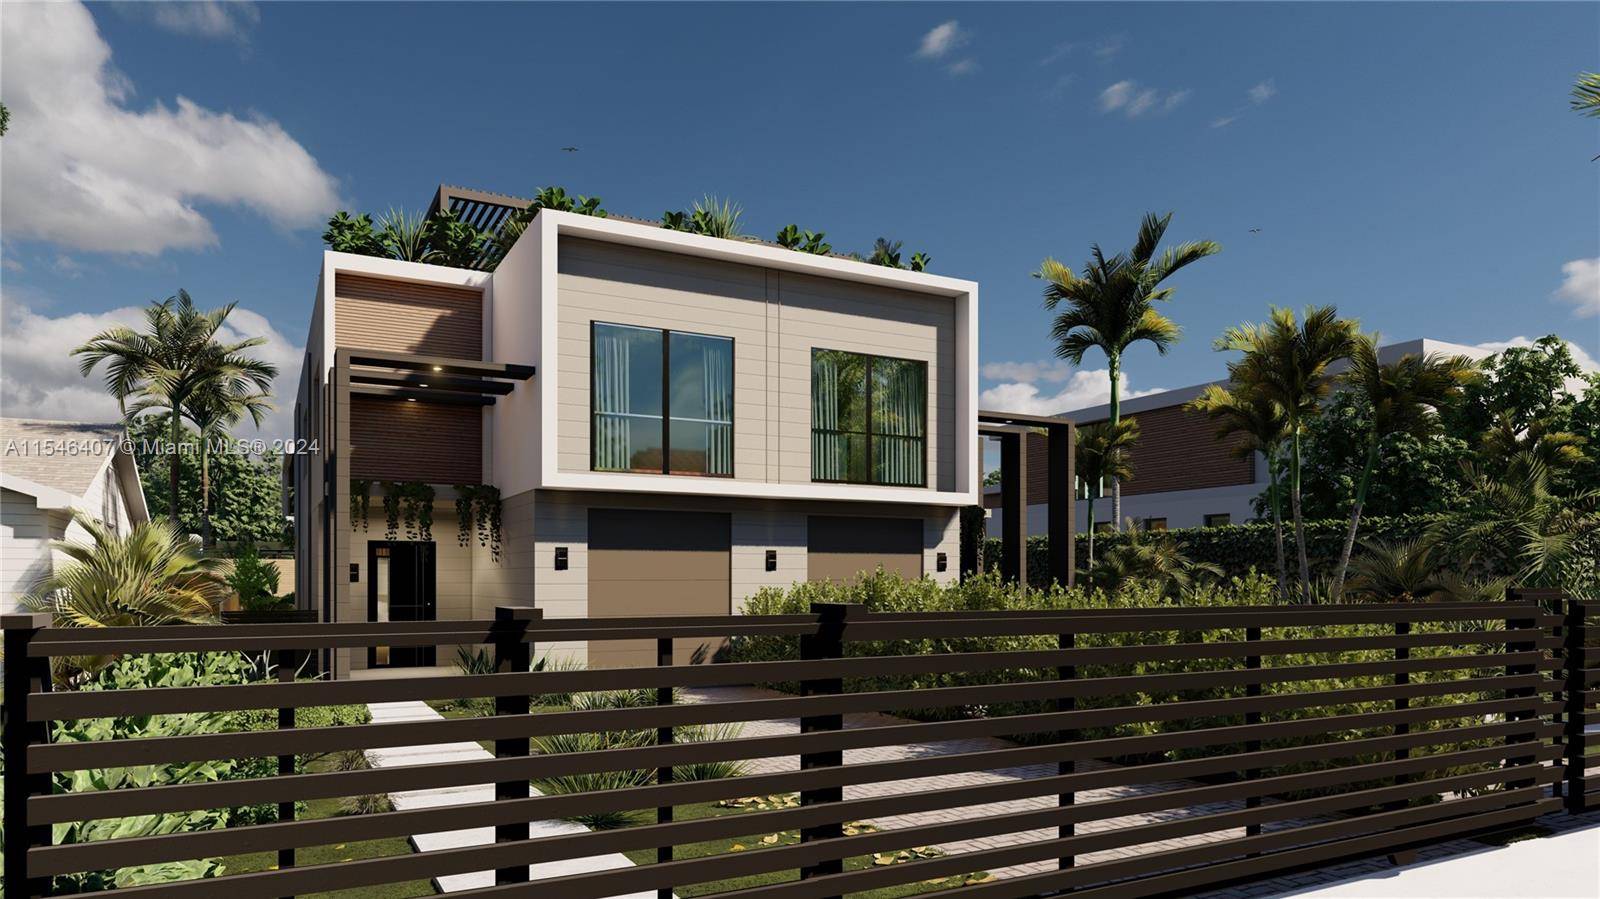 This contemporary townhouse design new construction is truly one of a kind.